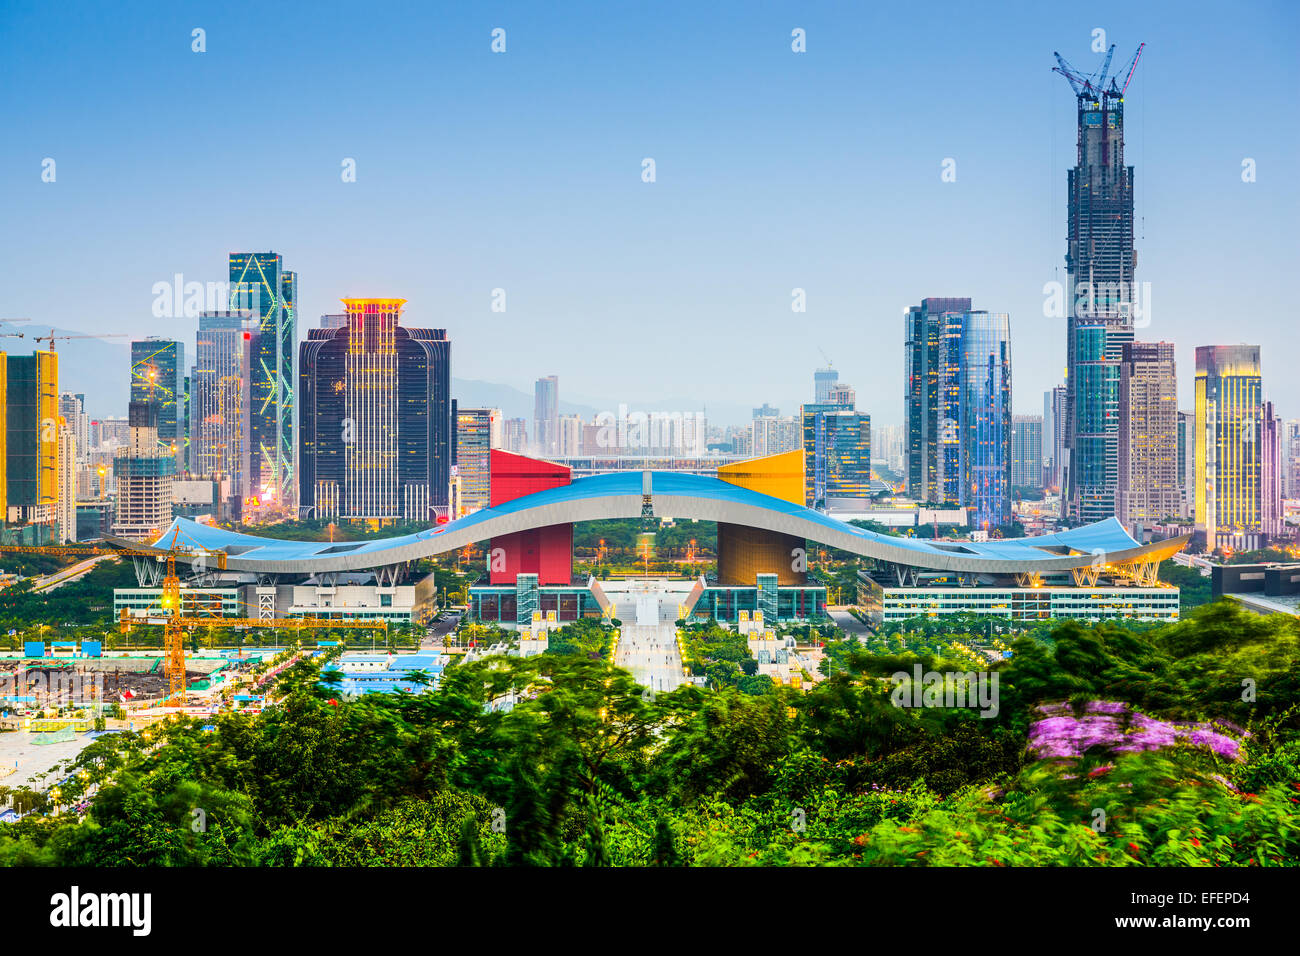 Shenzhen, China city skyline in the civic center district. Stock Photo